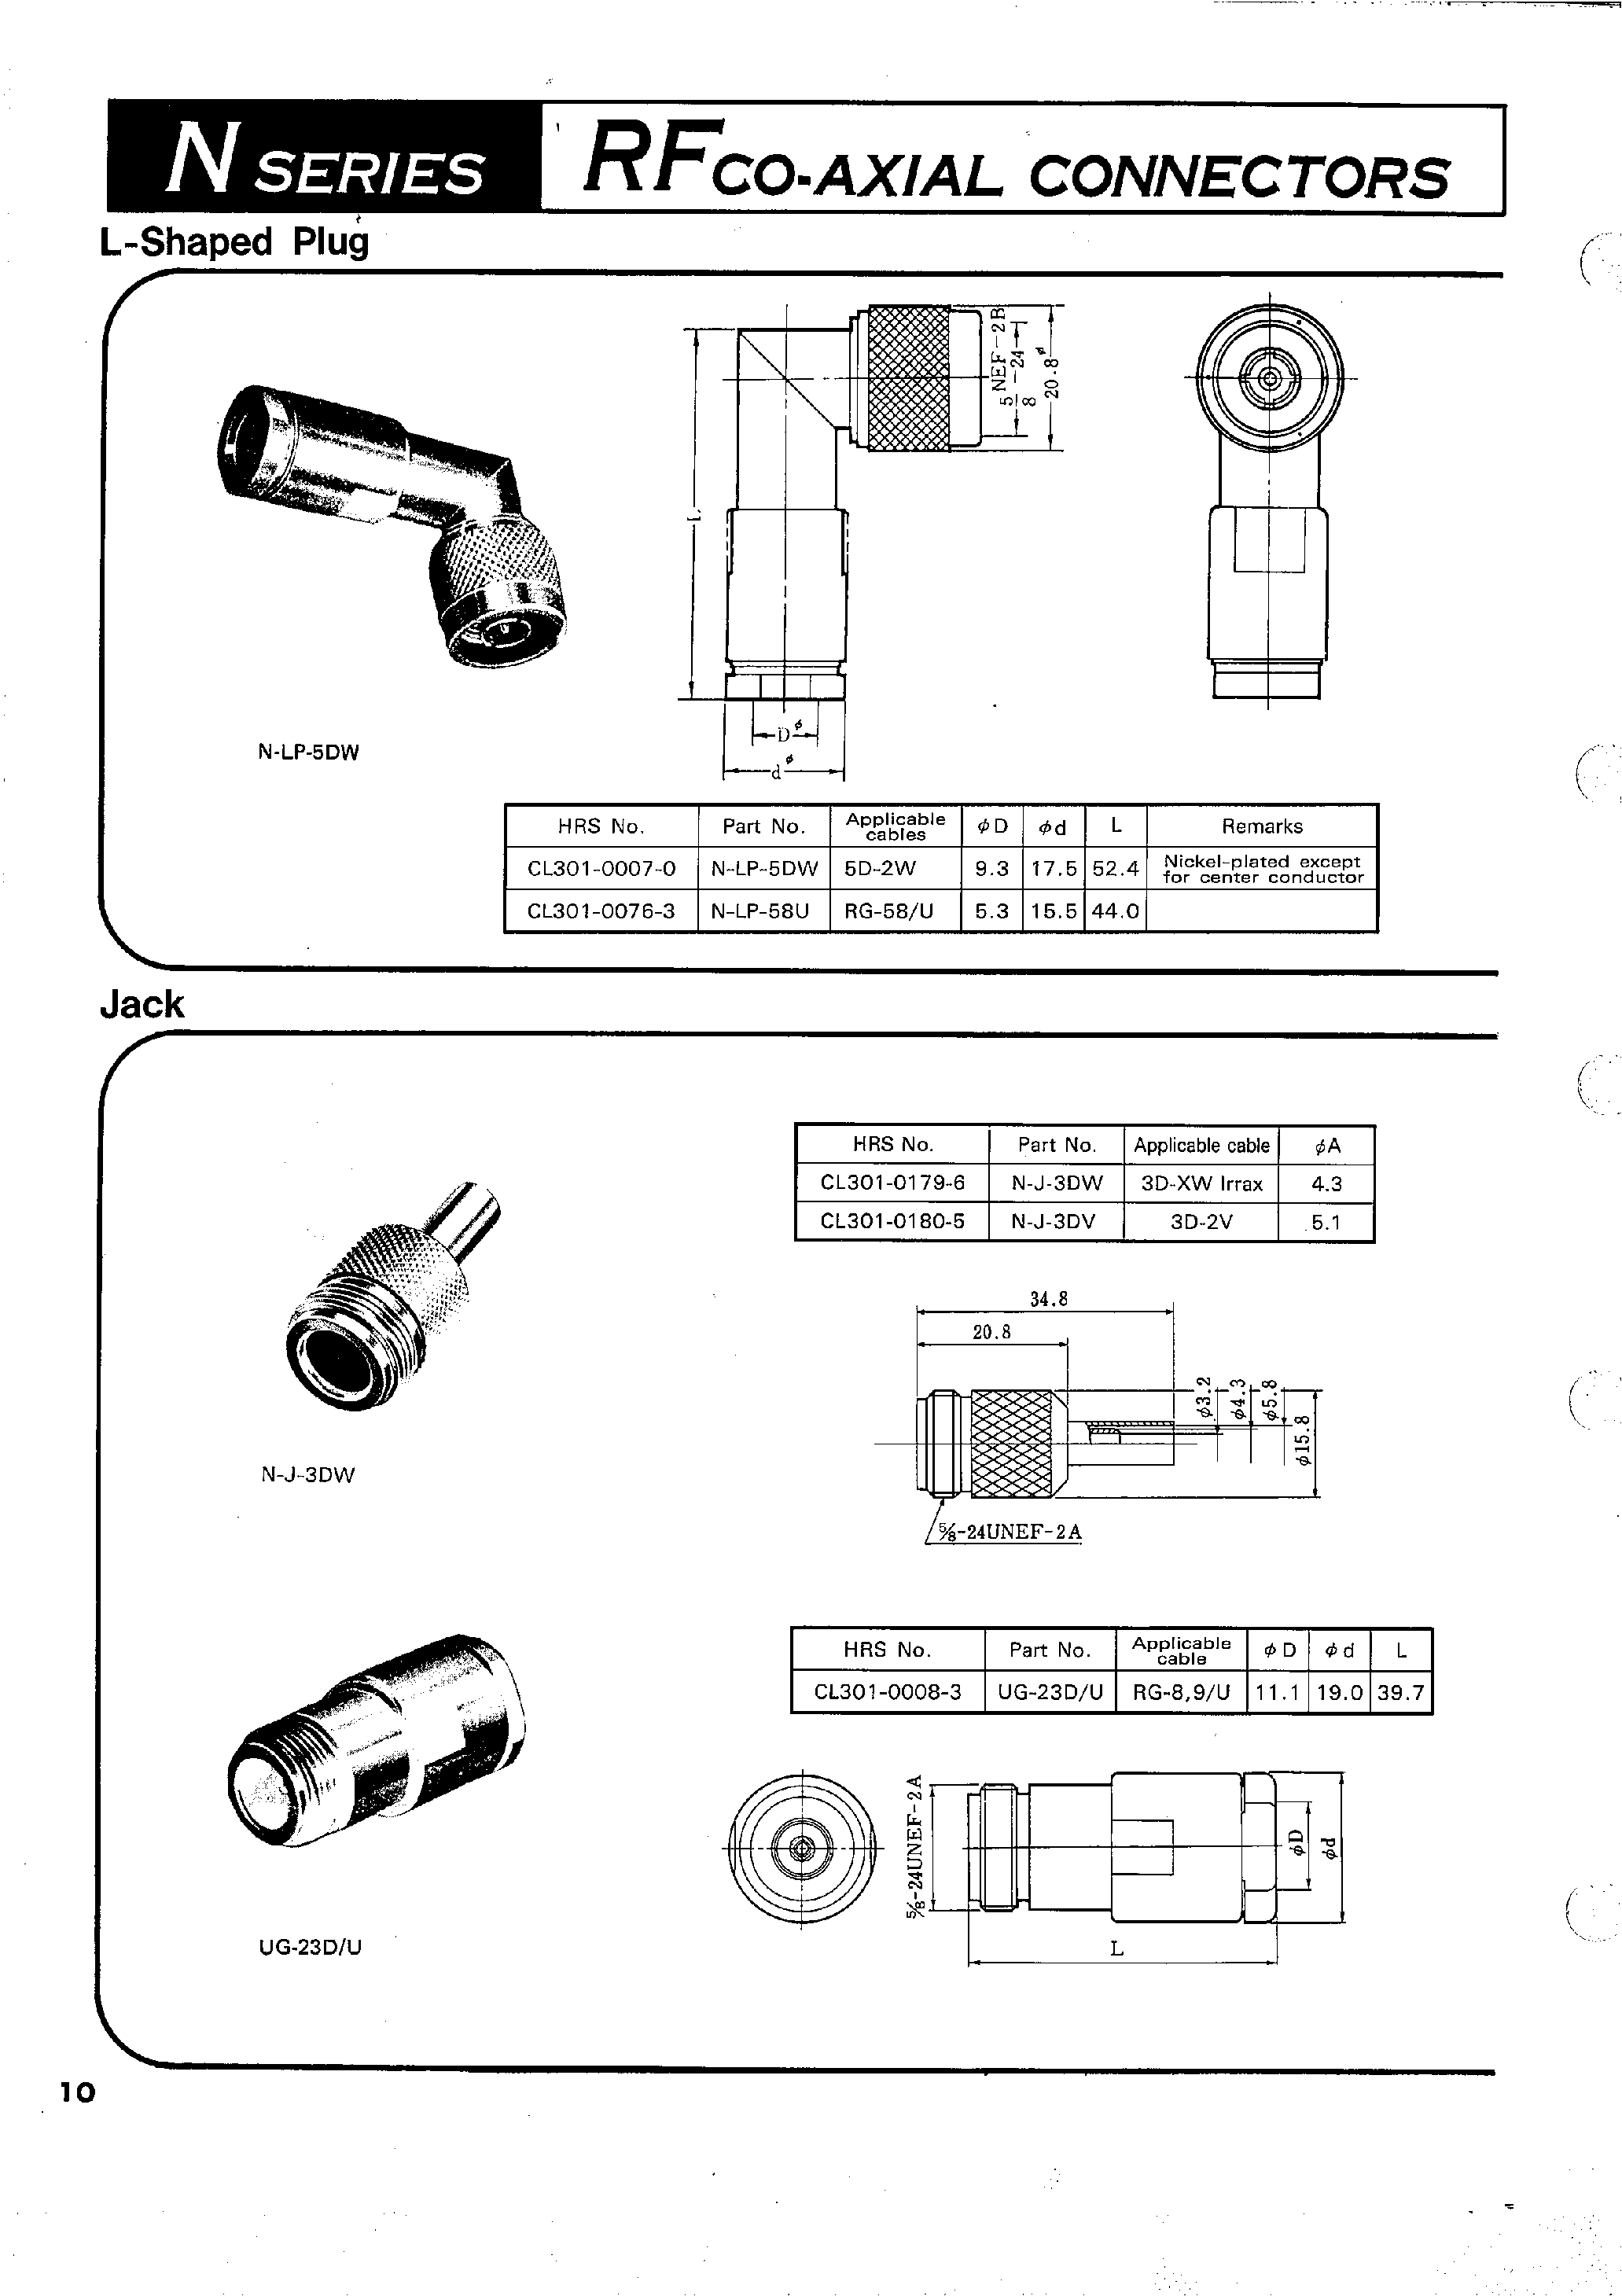 Datasheet N-J-3DW - RFCO-AXIAL CONNECTORS page 2